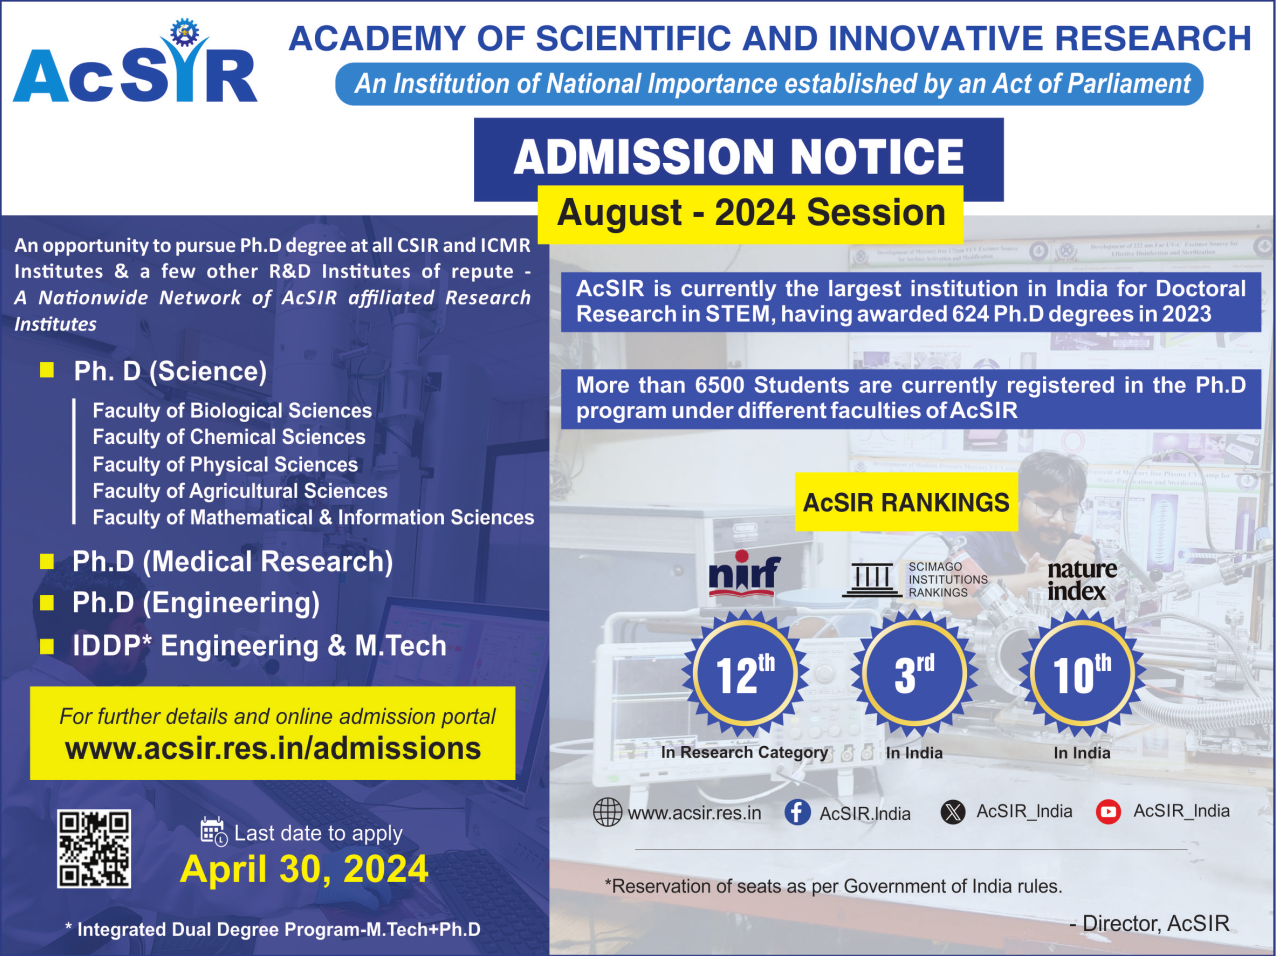 AcSIR - Admission advertisement for Aug-2024 session